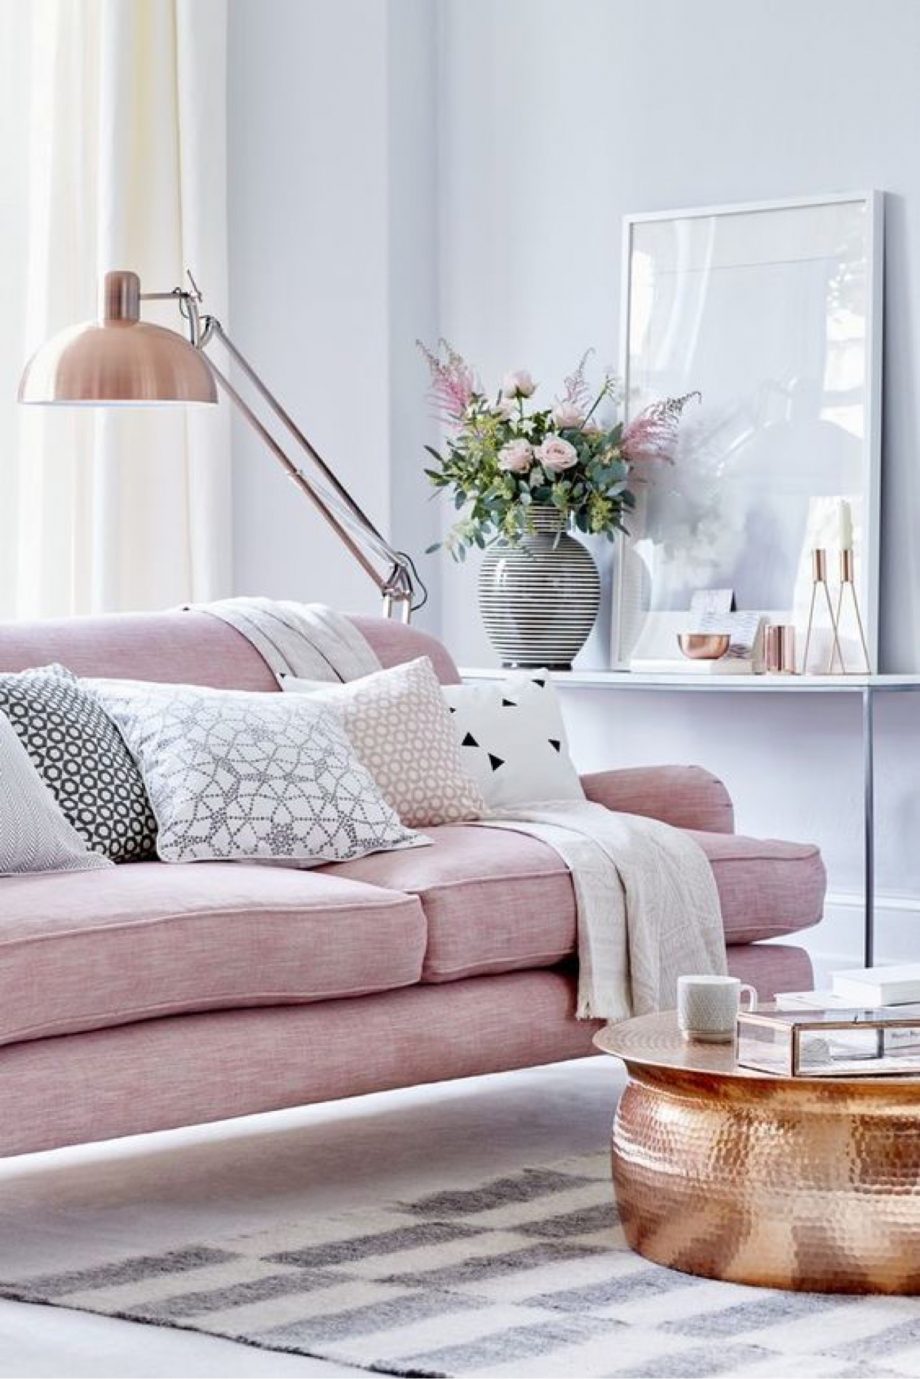 Grey And Pink Is A Perfect Combo For Living Room Design - Page 2 of 2